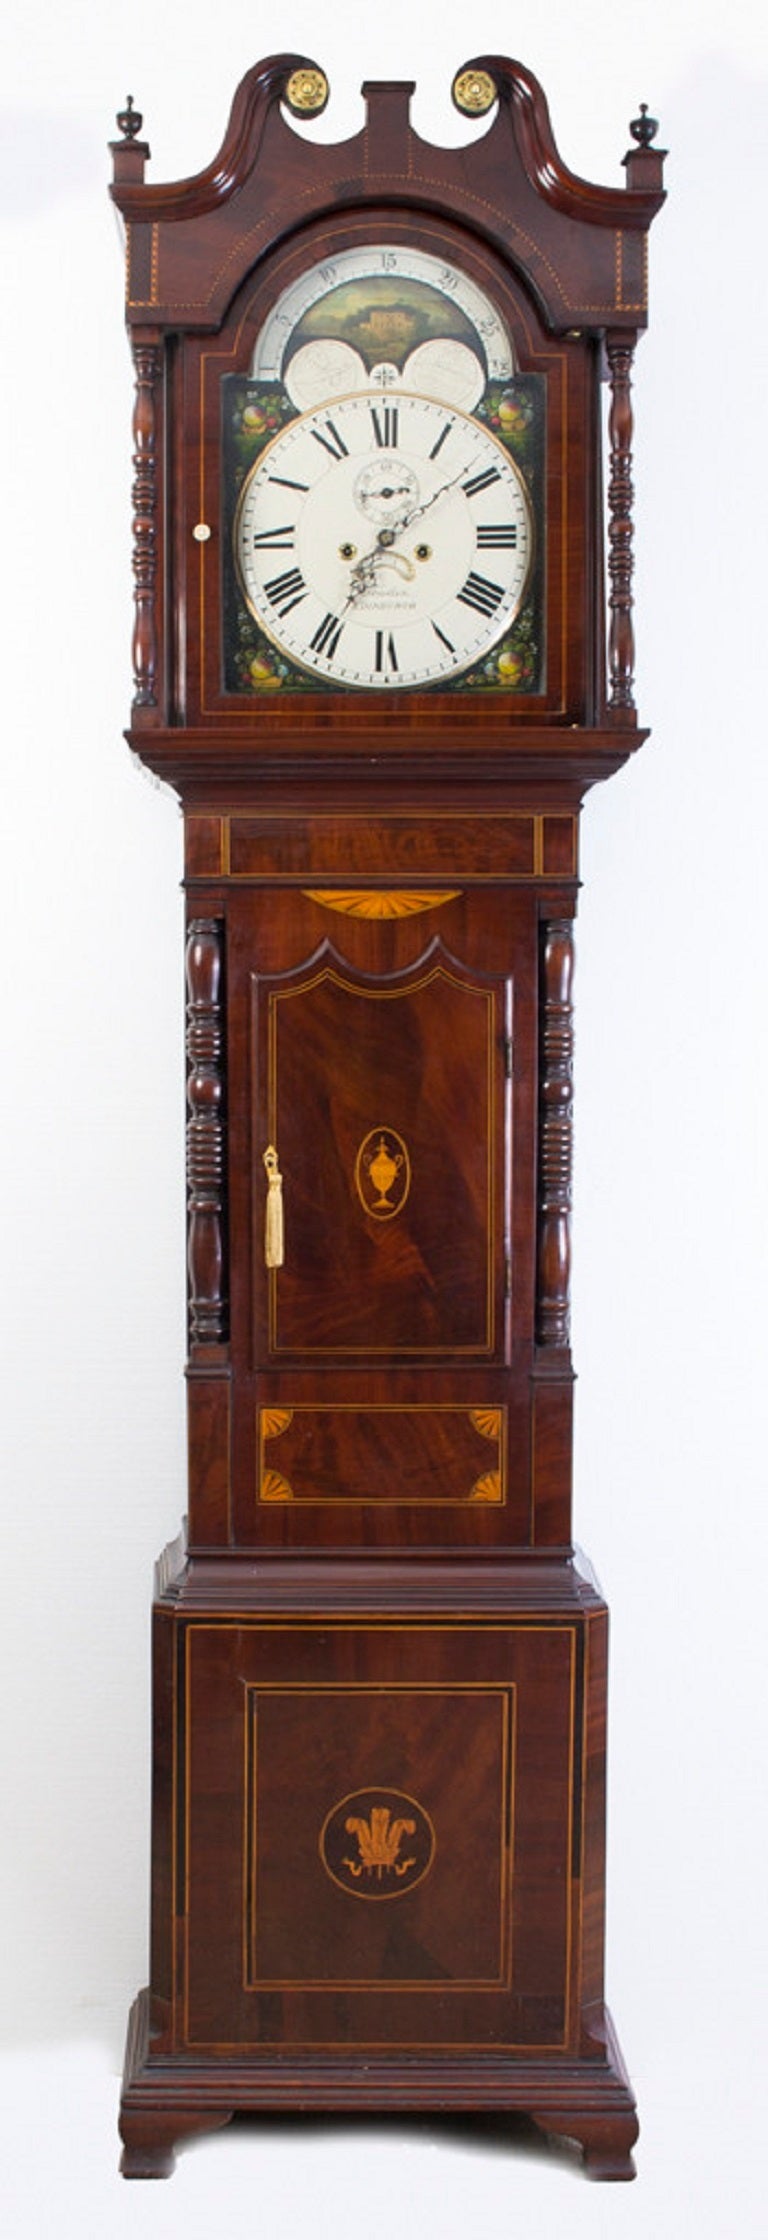 This is a beautiful early 19th century inlaid flame mahogany long case clock with a 36 cm white arched dial signed by a maker of repute, J Howden, Edinburgh. 

It has a subsidiary seconds and a date aperture, the corner spandrels of the dial are